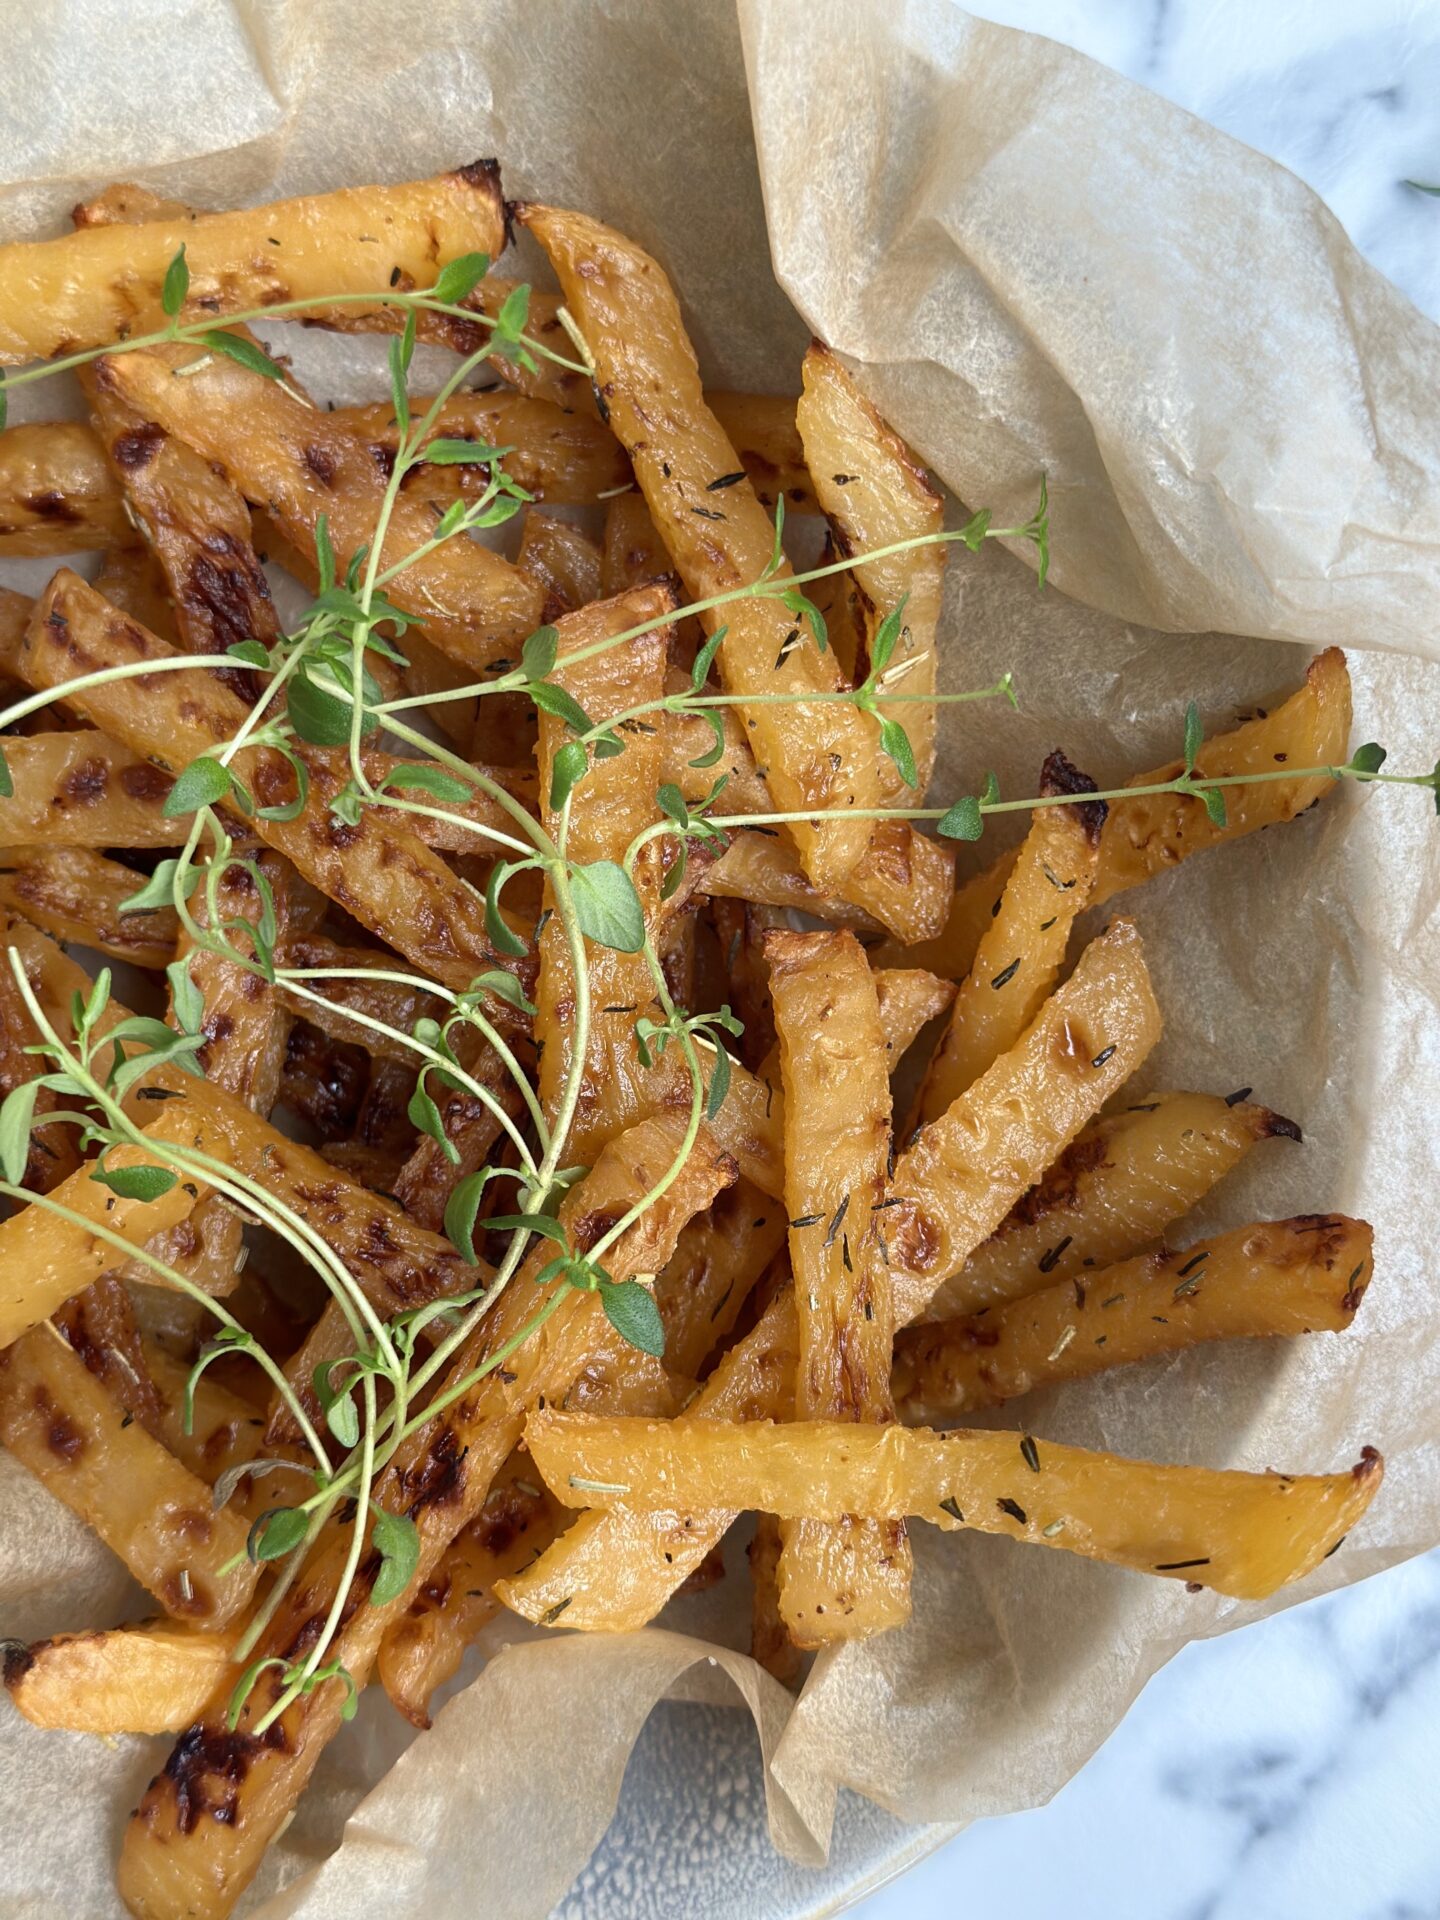 Oven roasted rutabaga fries seen from above, garnished with fresh thyme